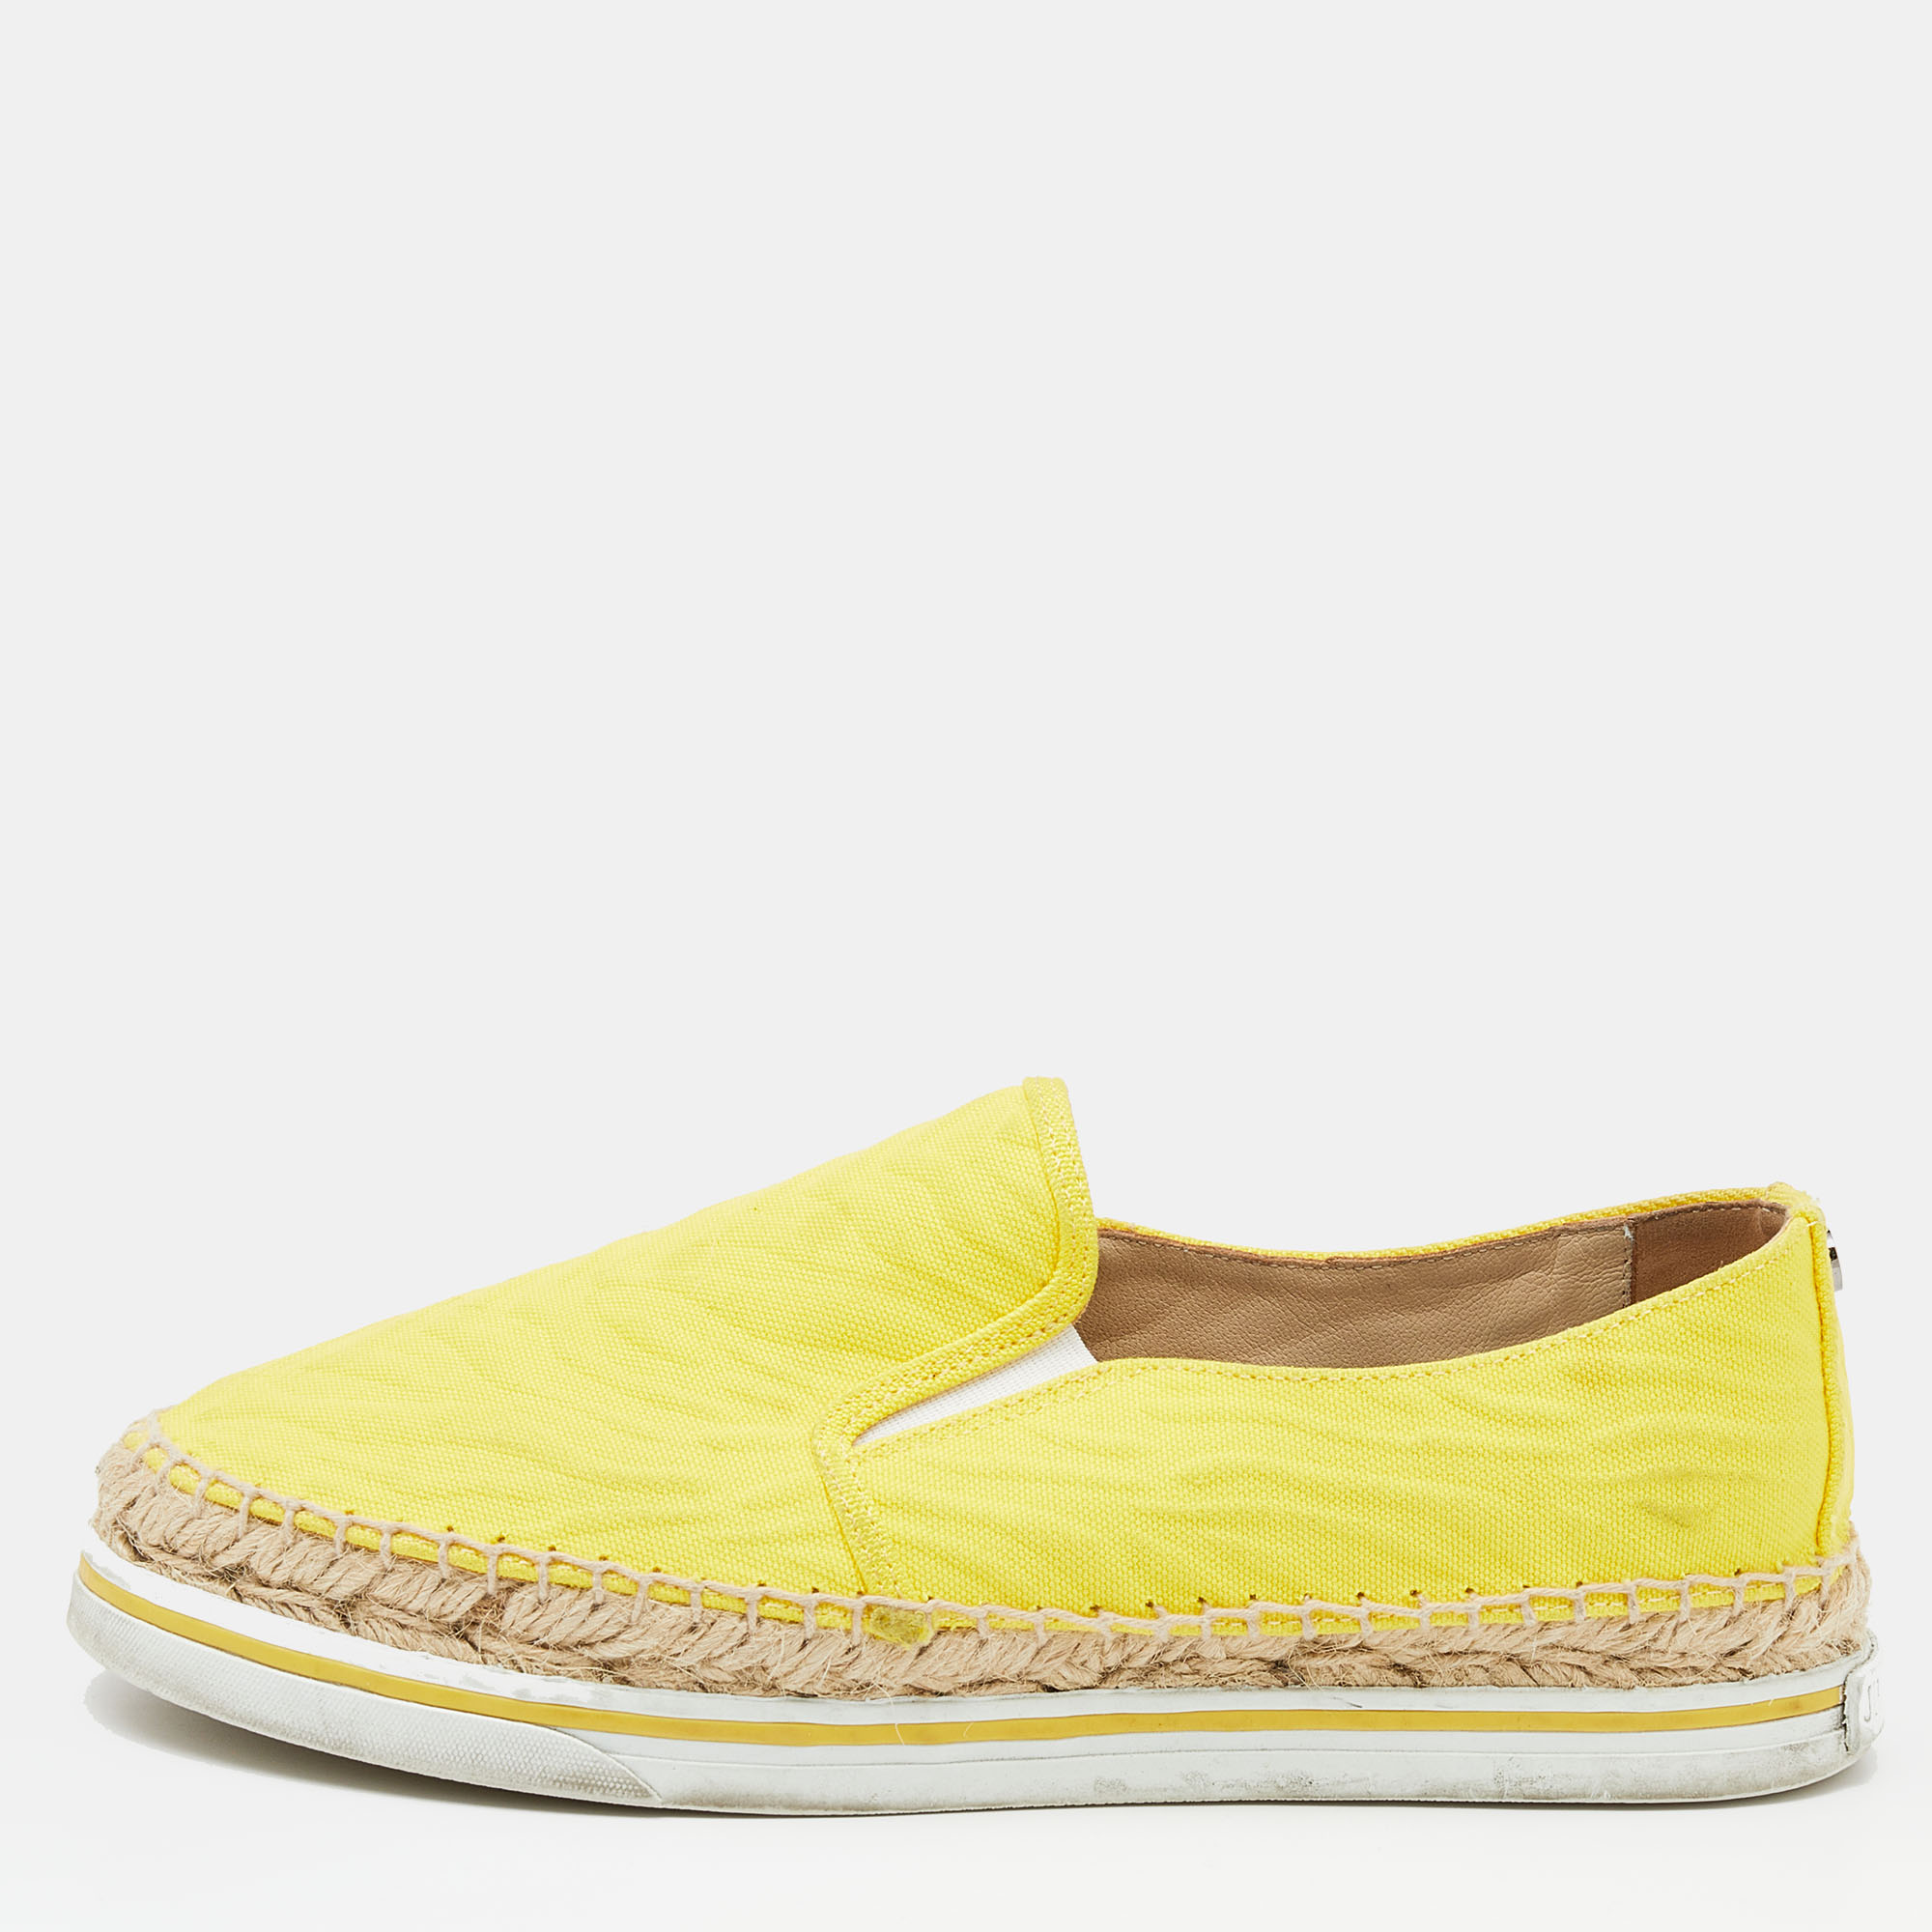 Pre-owned Jimmy Choo Yellow Canvas Dawn Slip On Espadrille Trainers Size 35.5